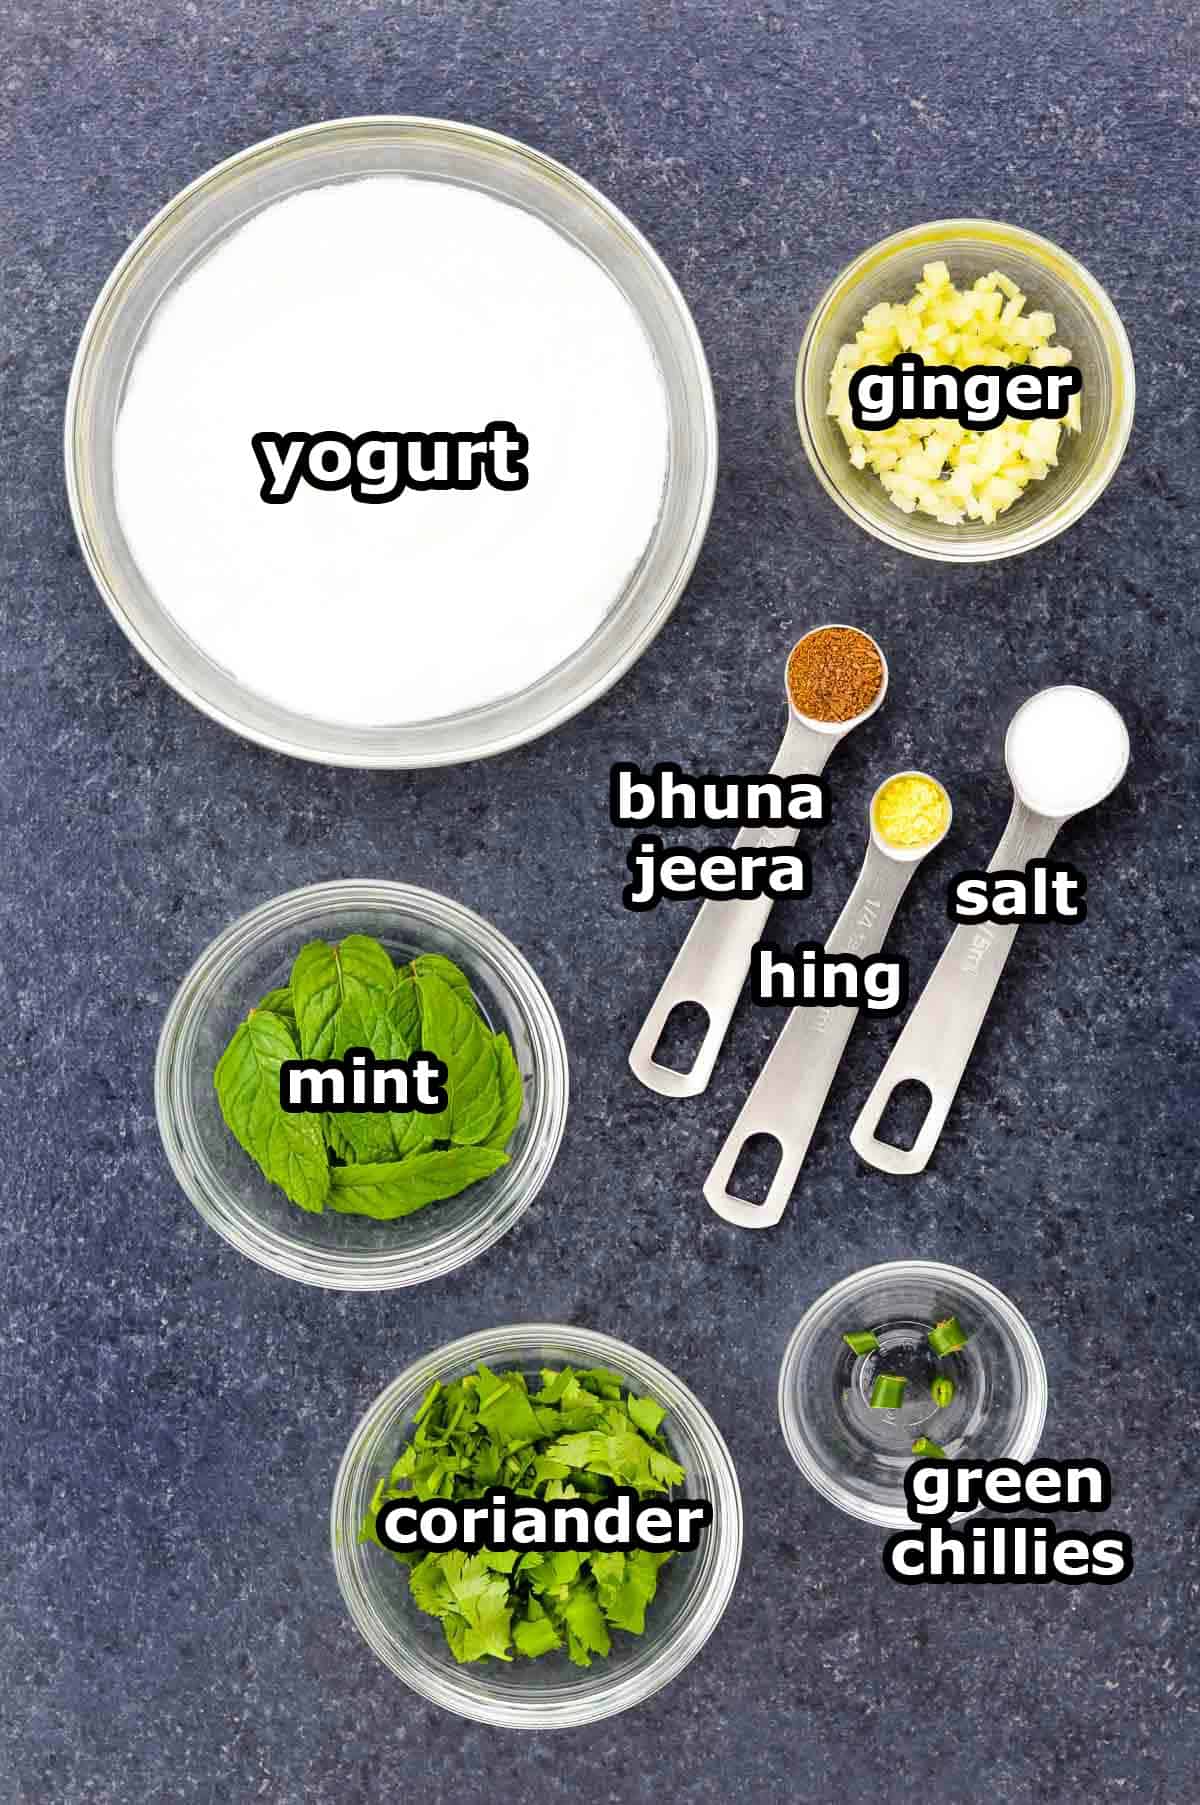 top shot of all the ingredients required to make masala chaas, shared along with ingredient labels.